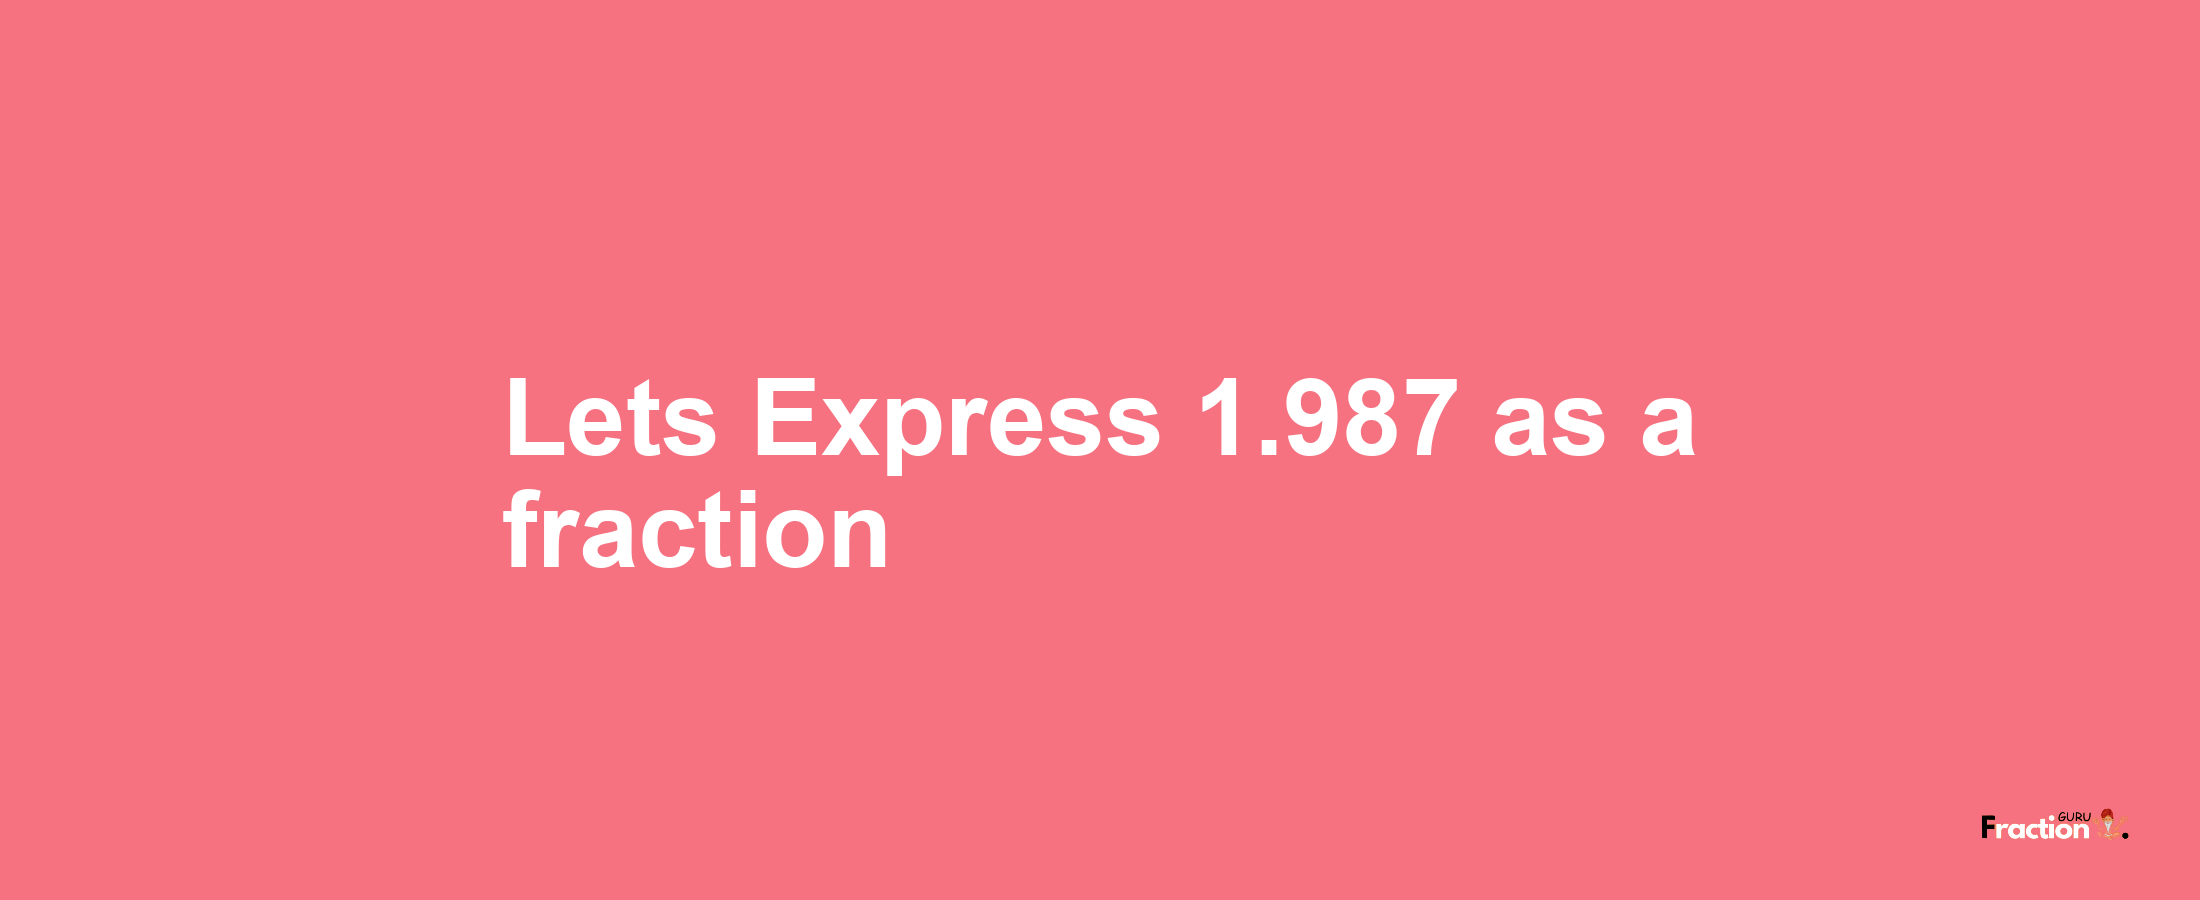 Lets Express 1.987 as afraction